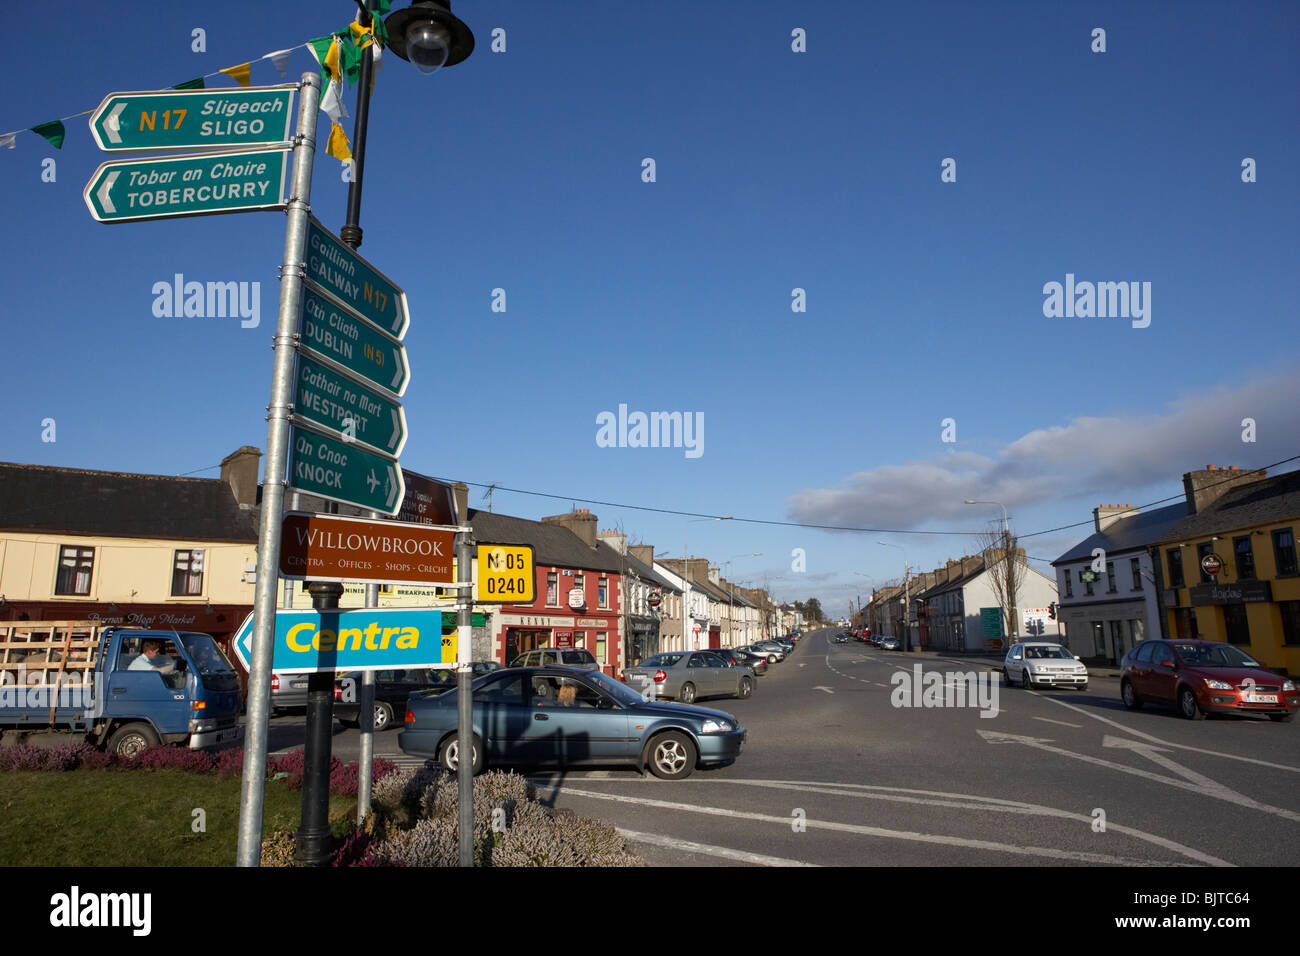 roadsigns in the square on main street Charlestown county mayo republic of ireland Stock Photo